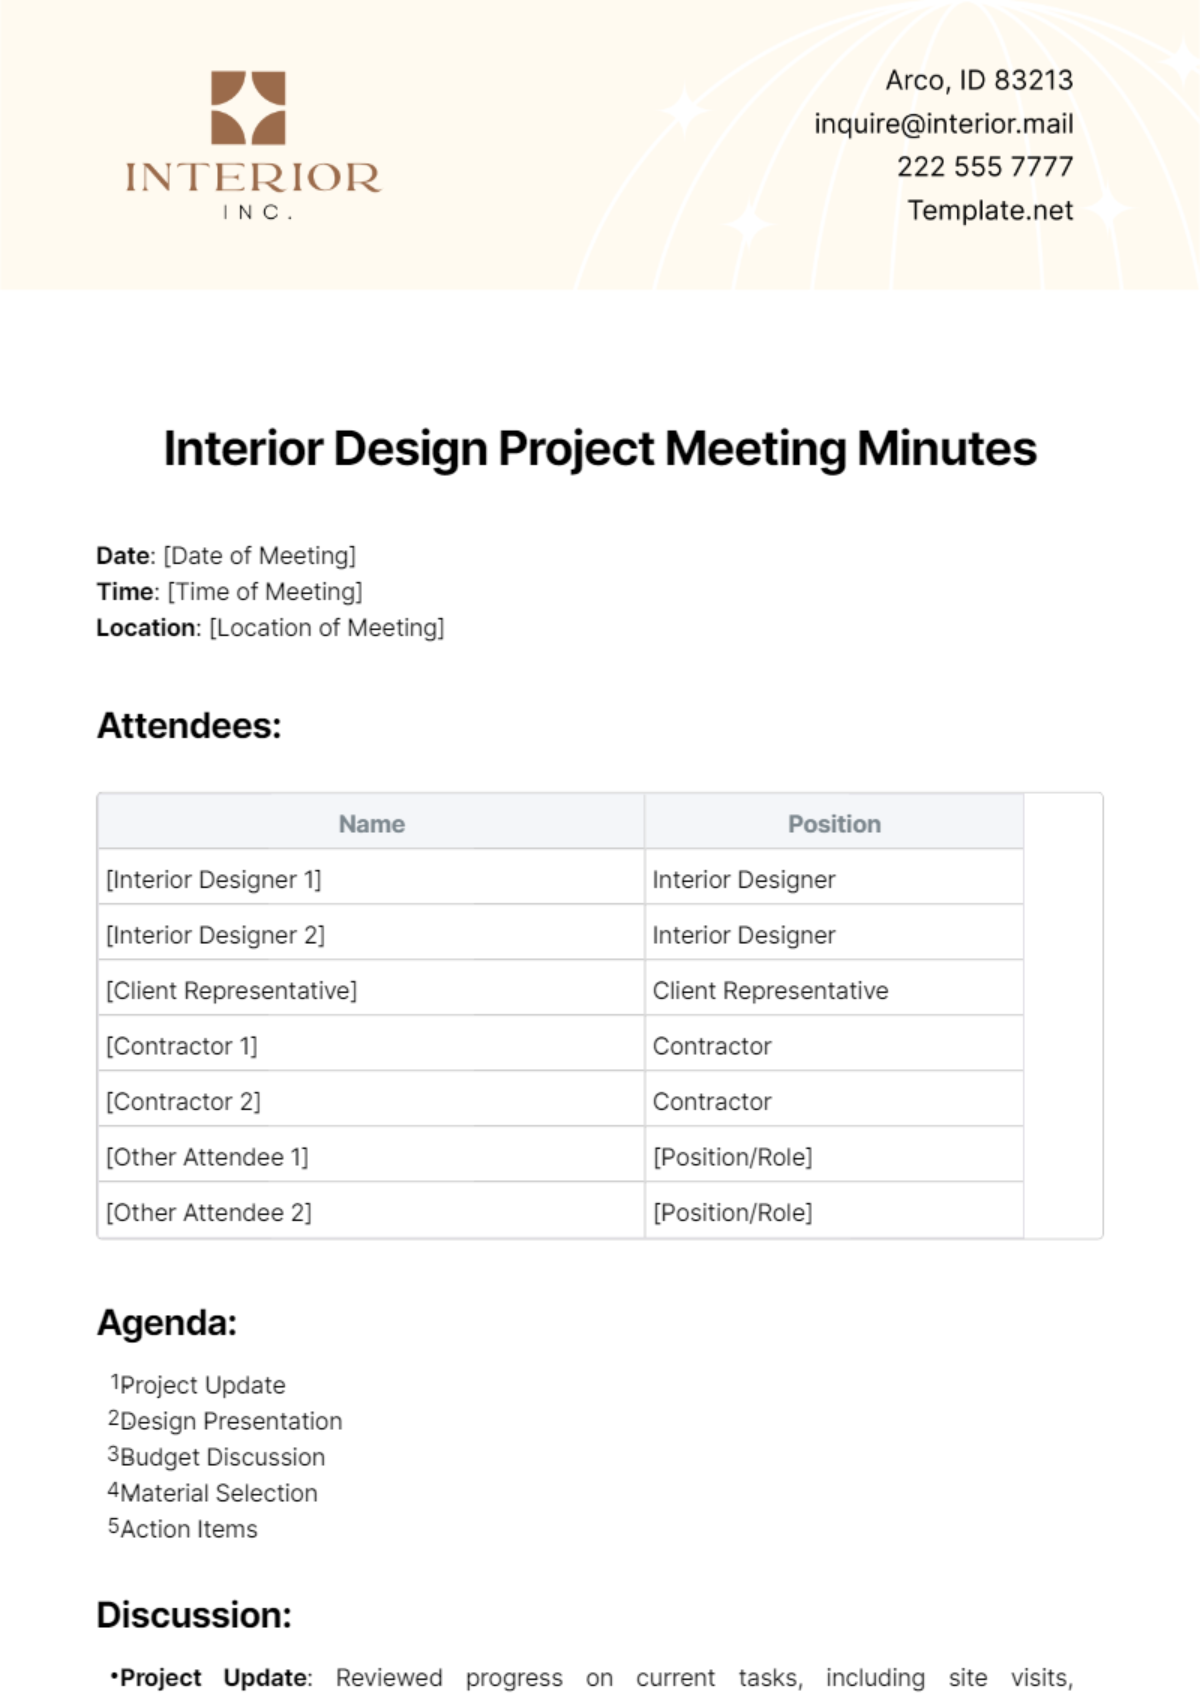 Interior Design Project Meeting Minutes Template